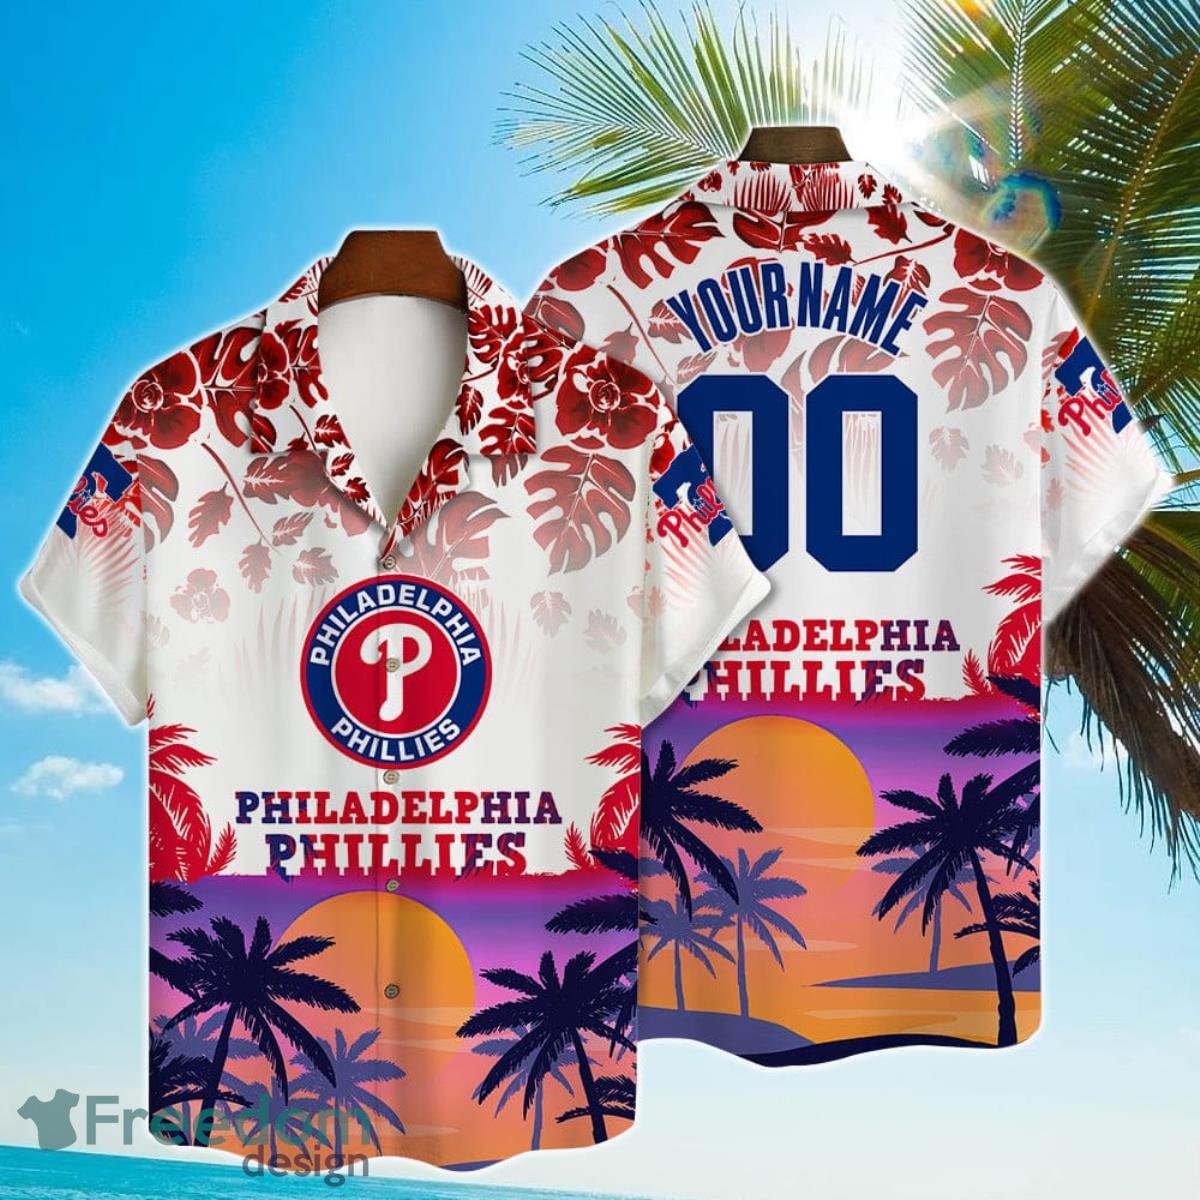 personalized phillies shirt